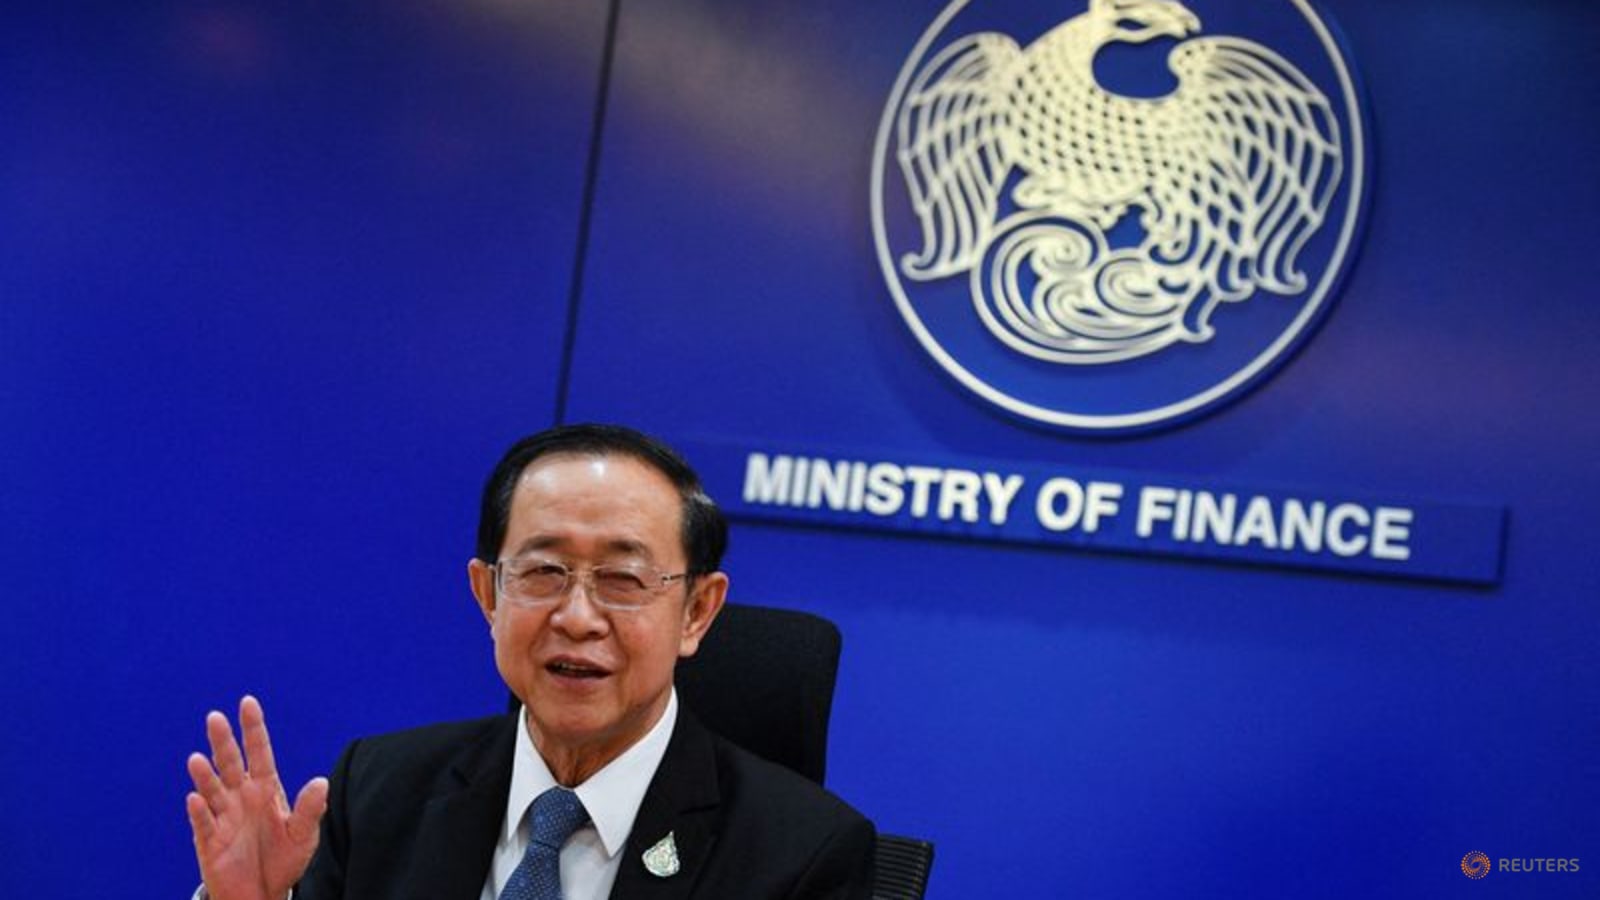 thai-finance-minister-says-no-impact-on-thailand-so-far-from-us-banking-woes